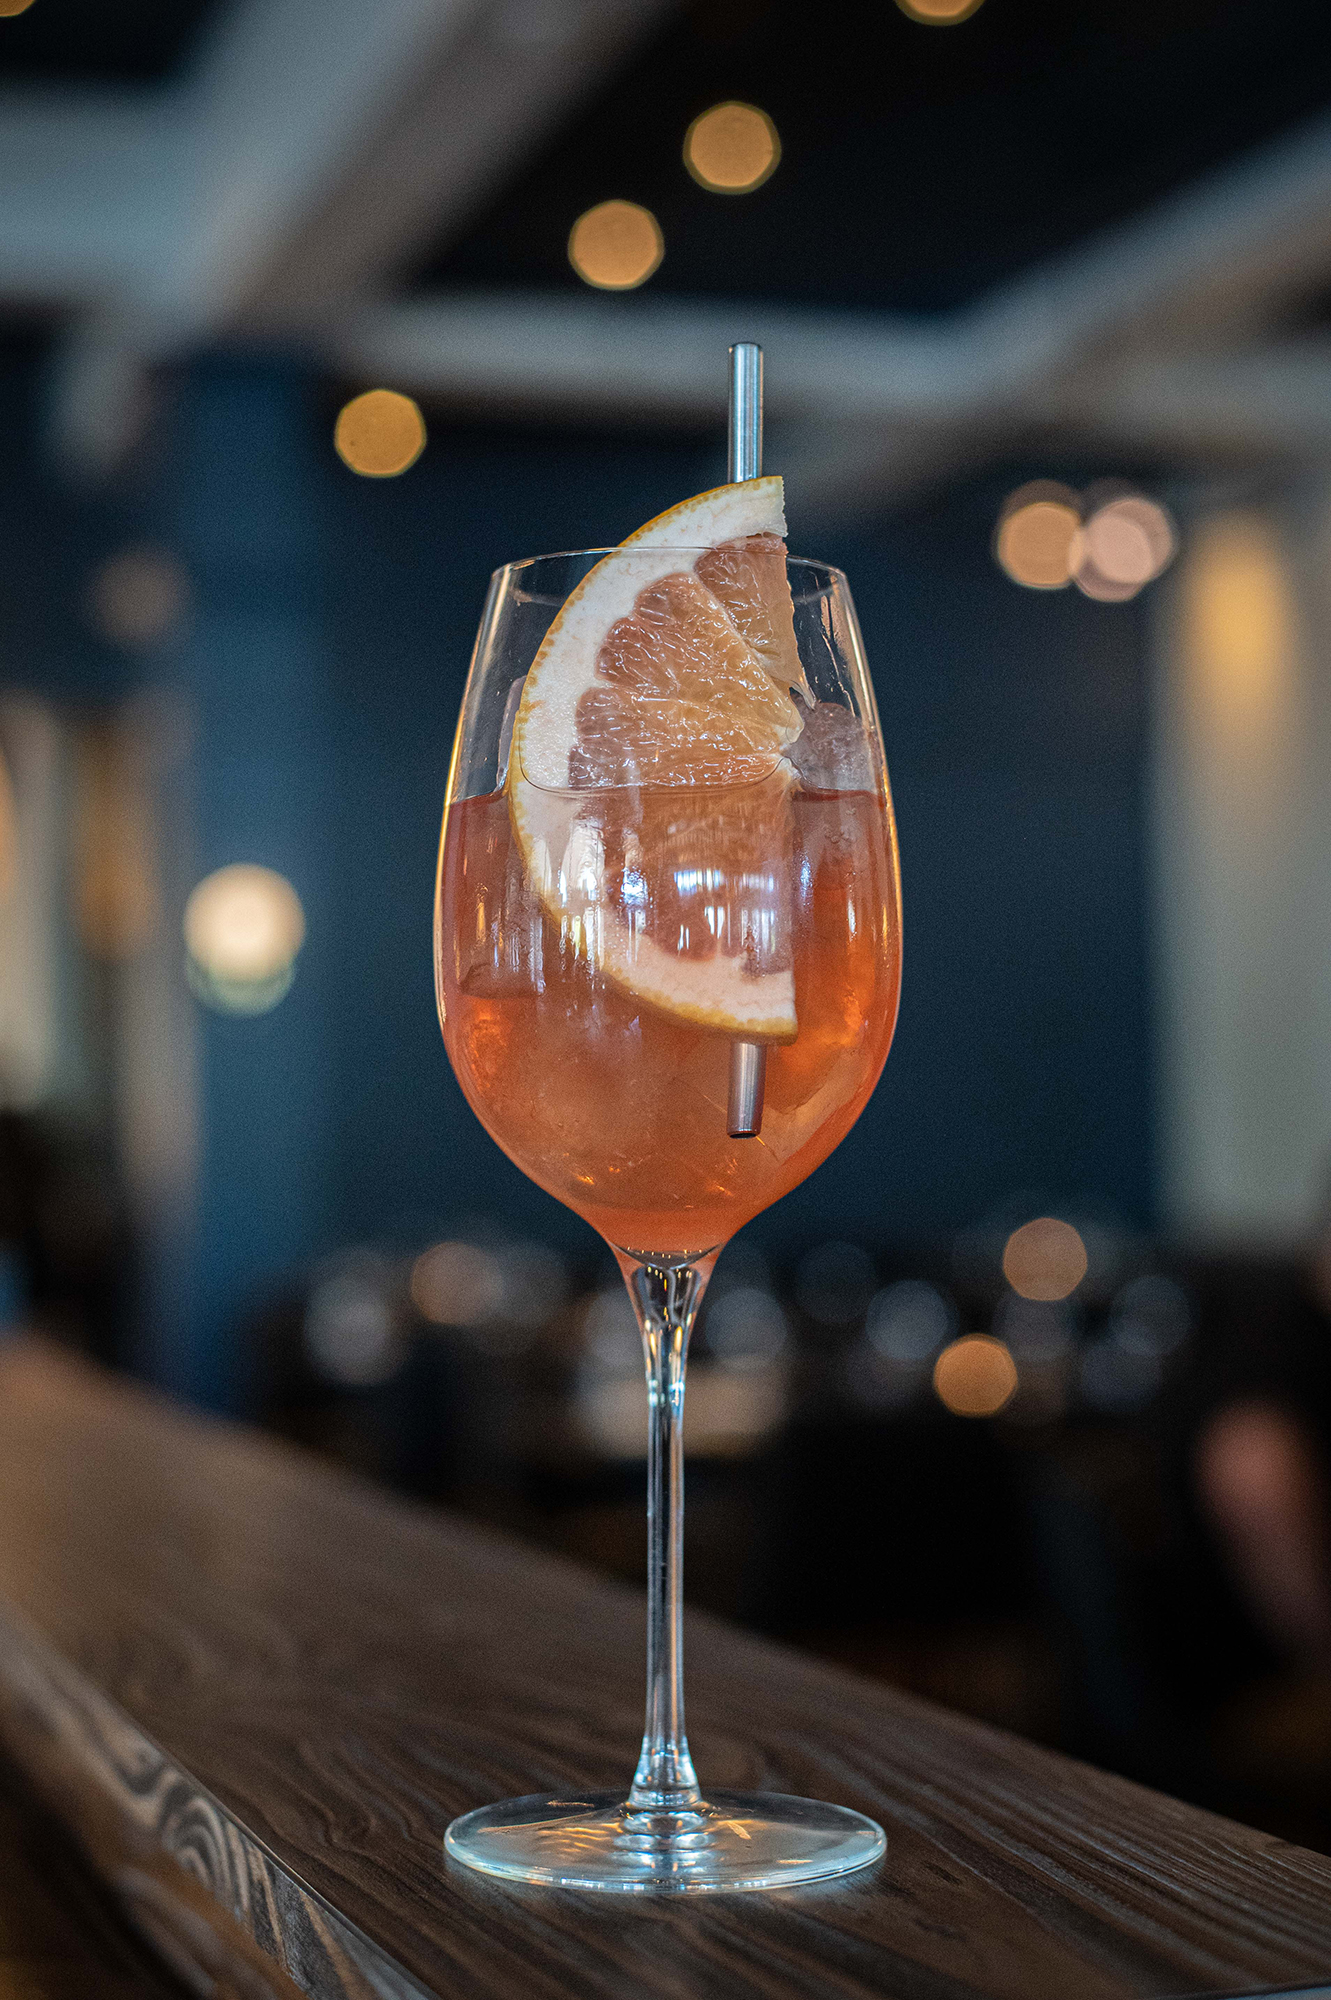 An orange mocktail in a stemmed glass with a slice of citrus and a metal straw called a Lavish Grove